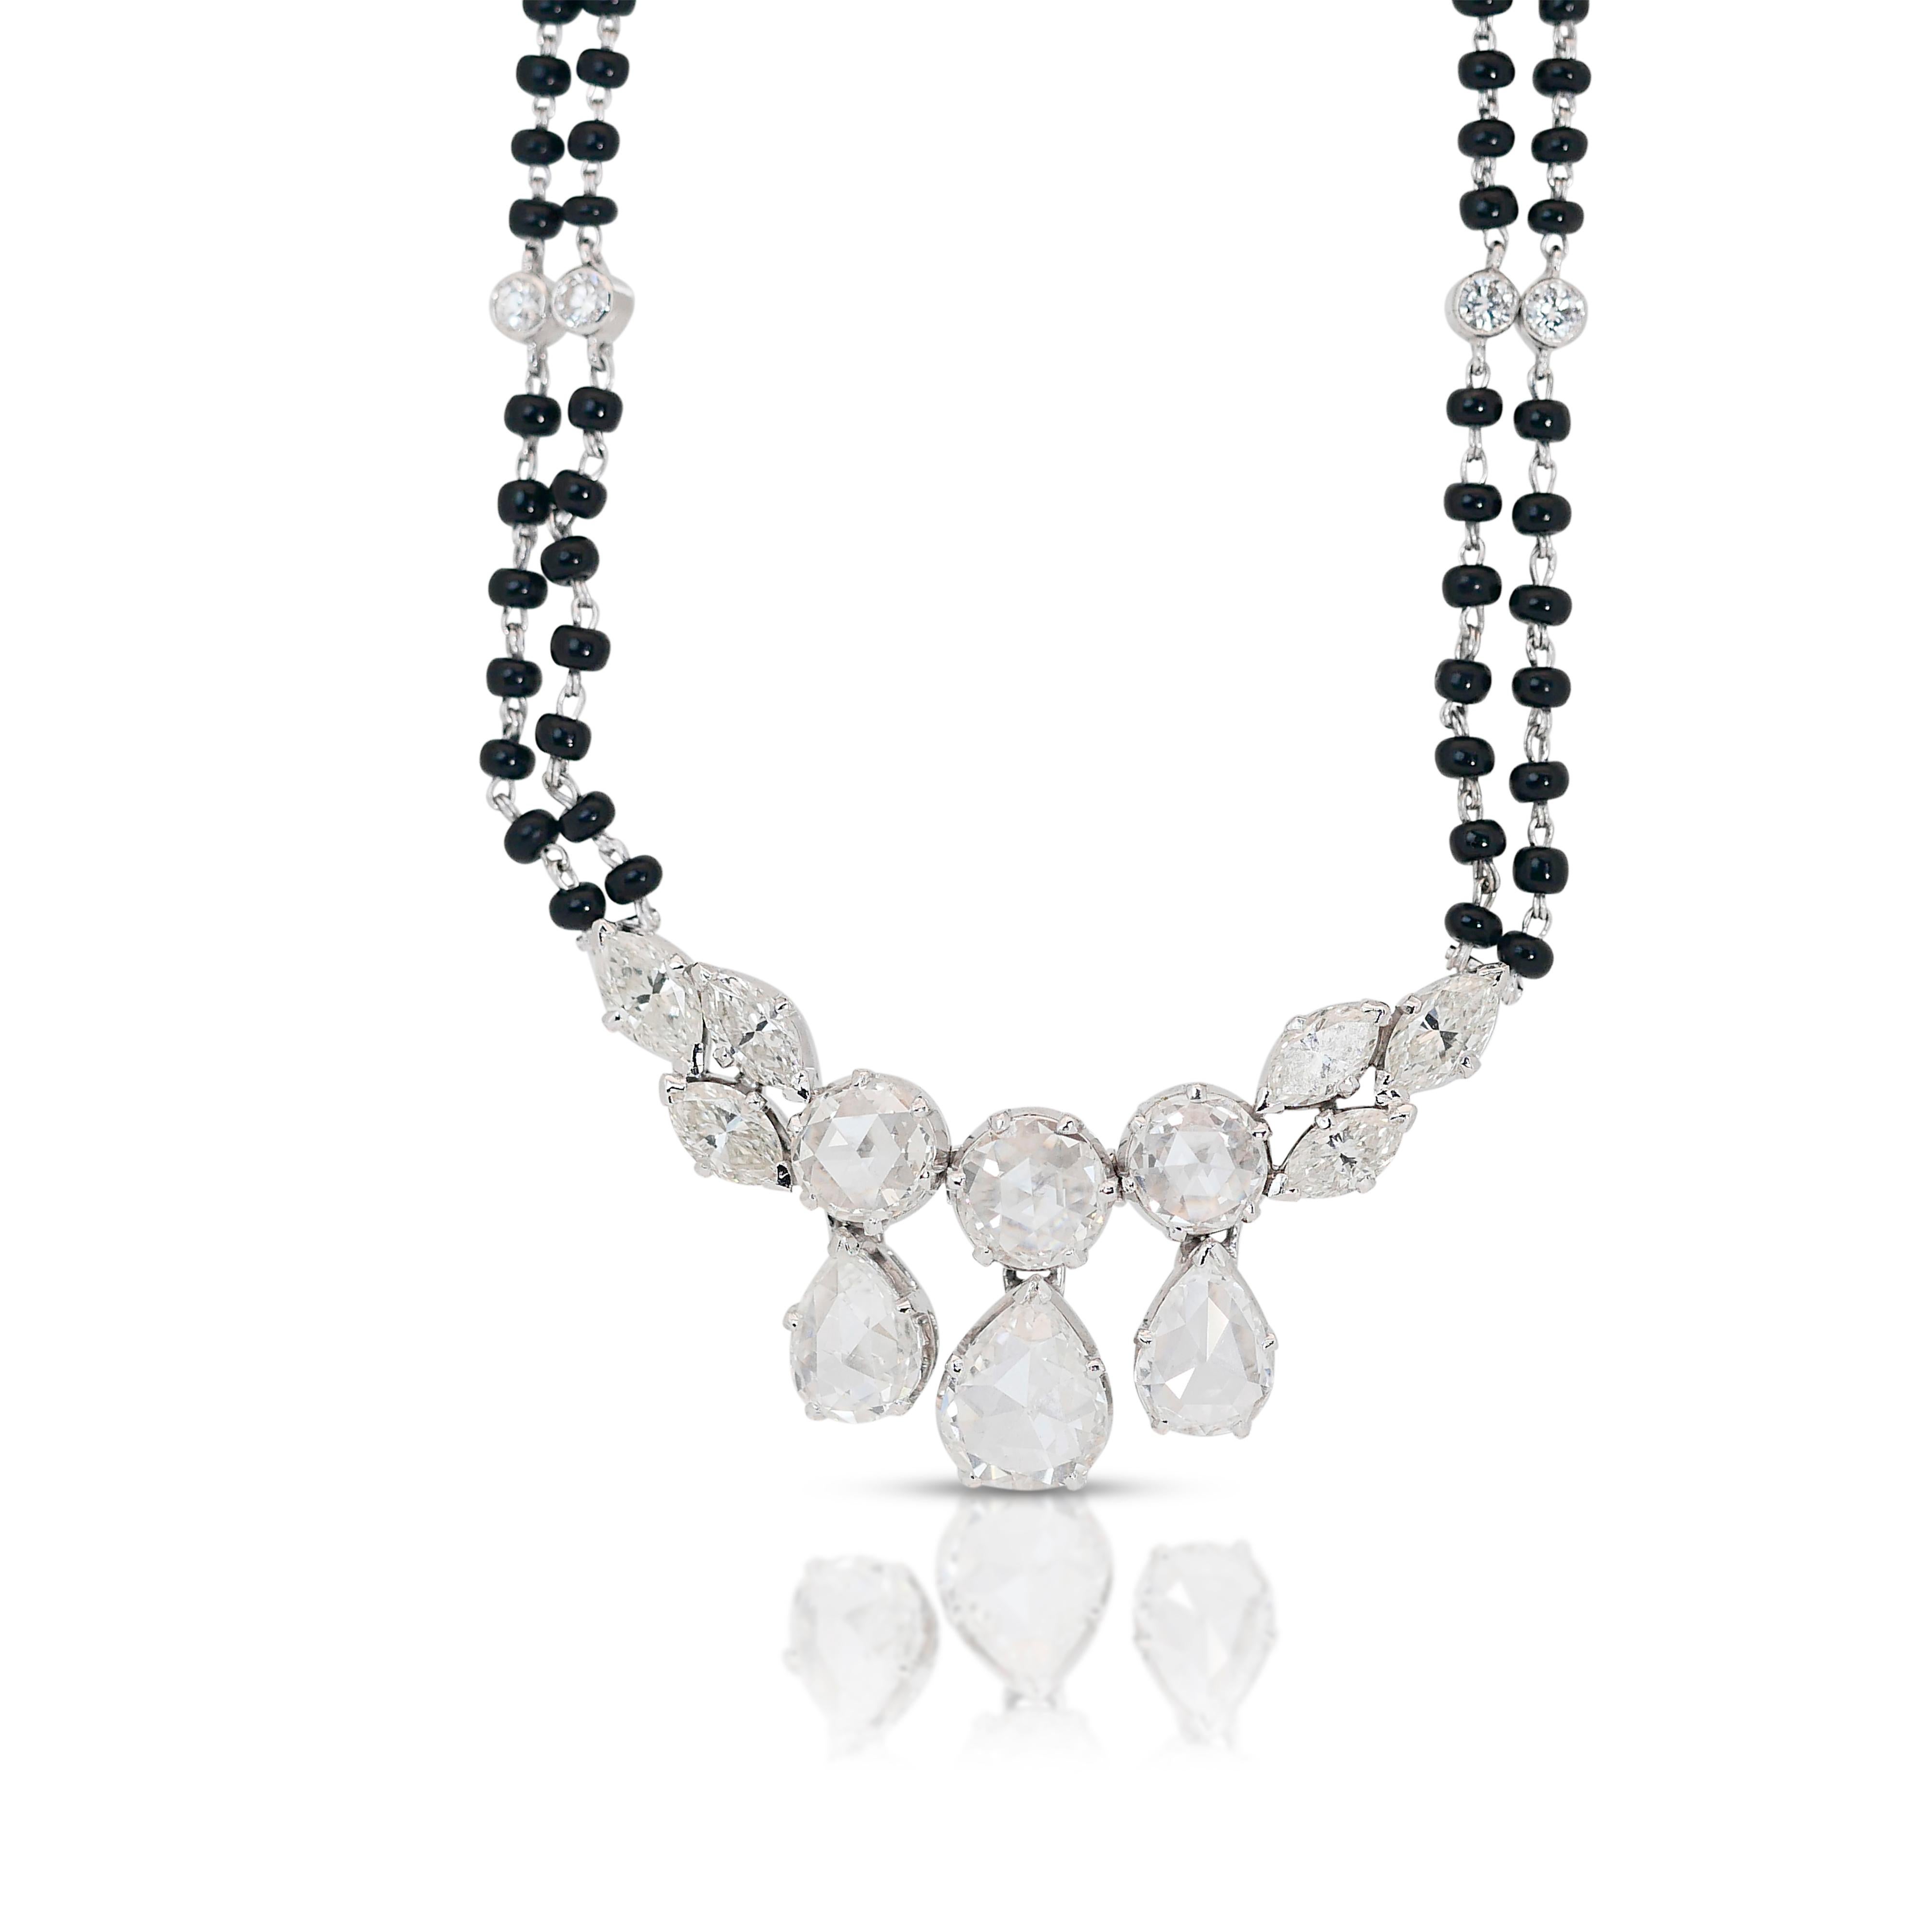 Glamorous 8.02 ct Onyx and Diamond Necklace in 18k White Gold - IGI Certified

Crafted with meticulous attention to detail, this necklace features a stunning array of diamonds totaling 8.02 carats, set against the backdrop of 18k white gold,